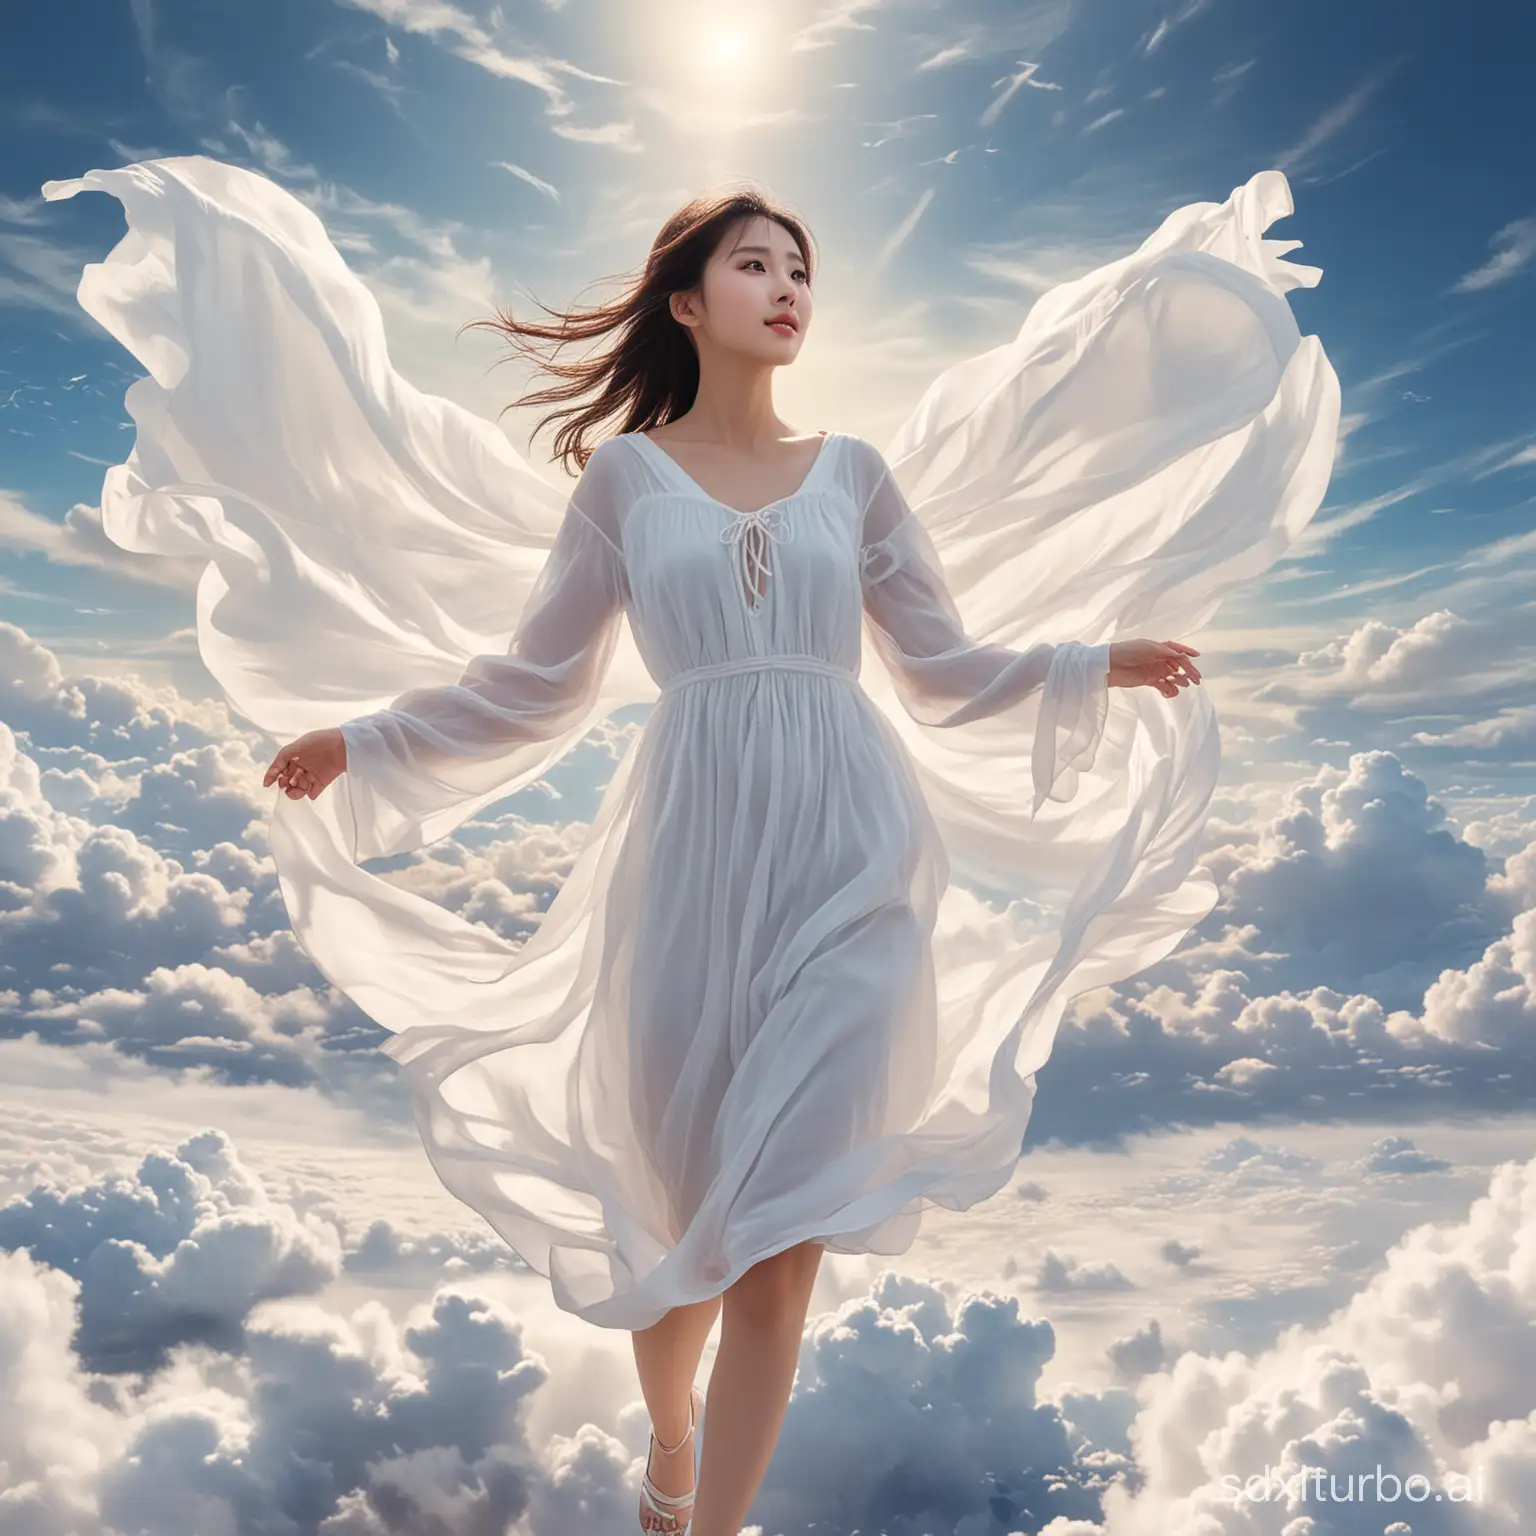 Chinese-Girl-in-Ethereal-White-Dress-Soaring-Through-the-Sky